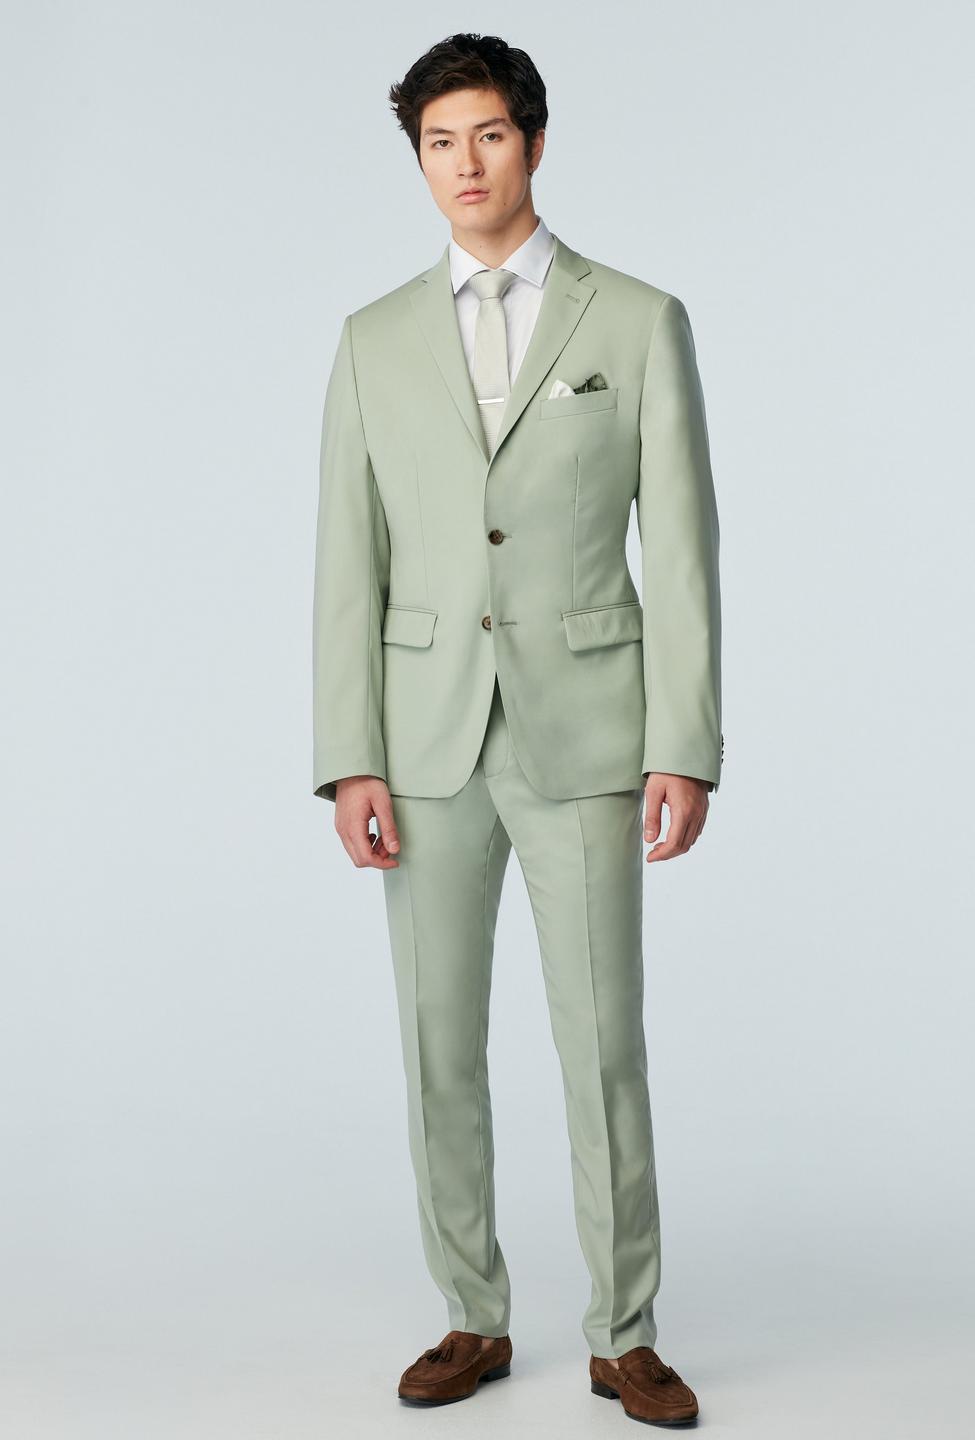 Green suit - Solid Design from Indochino Collection